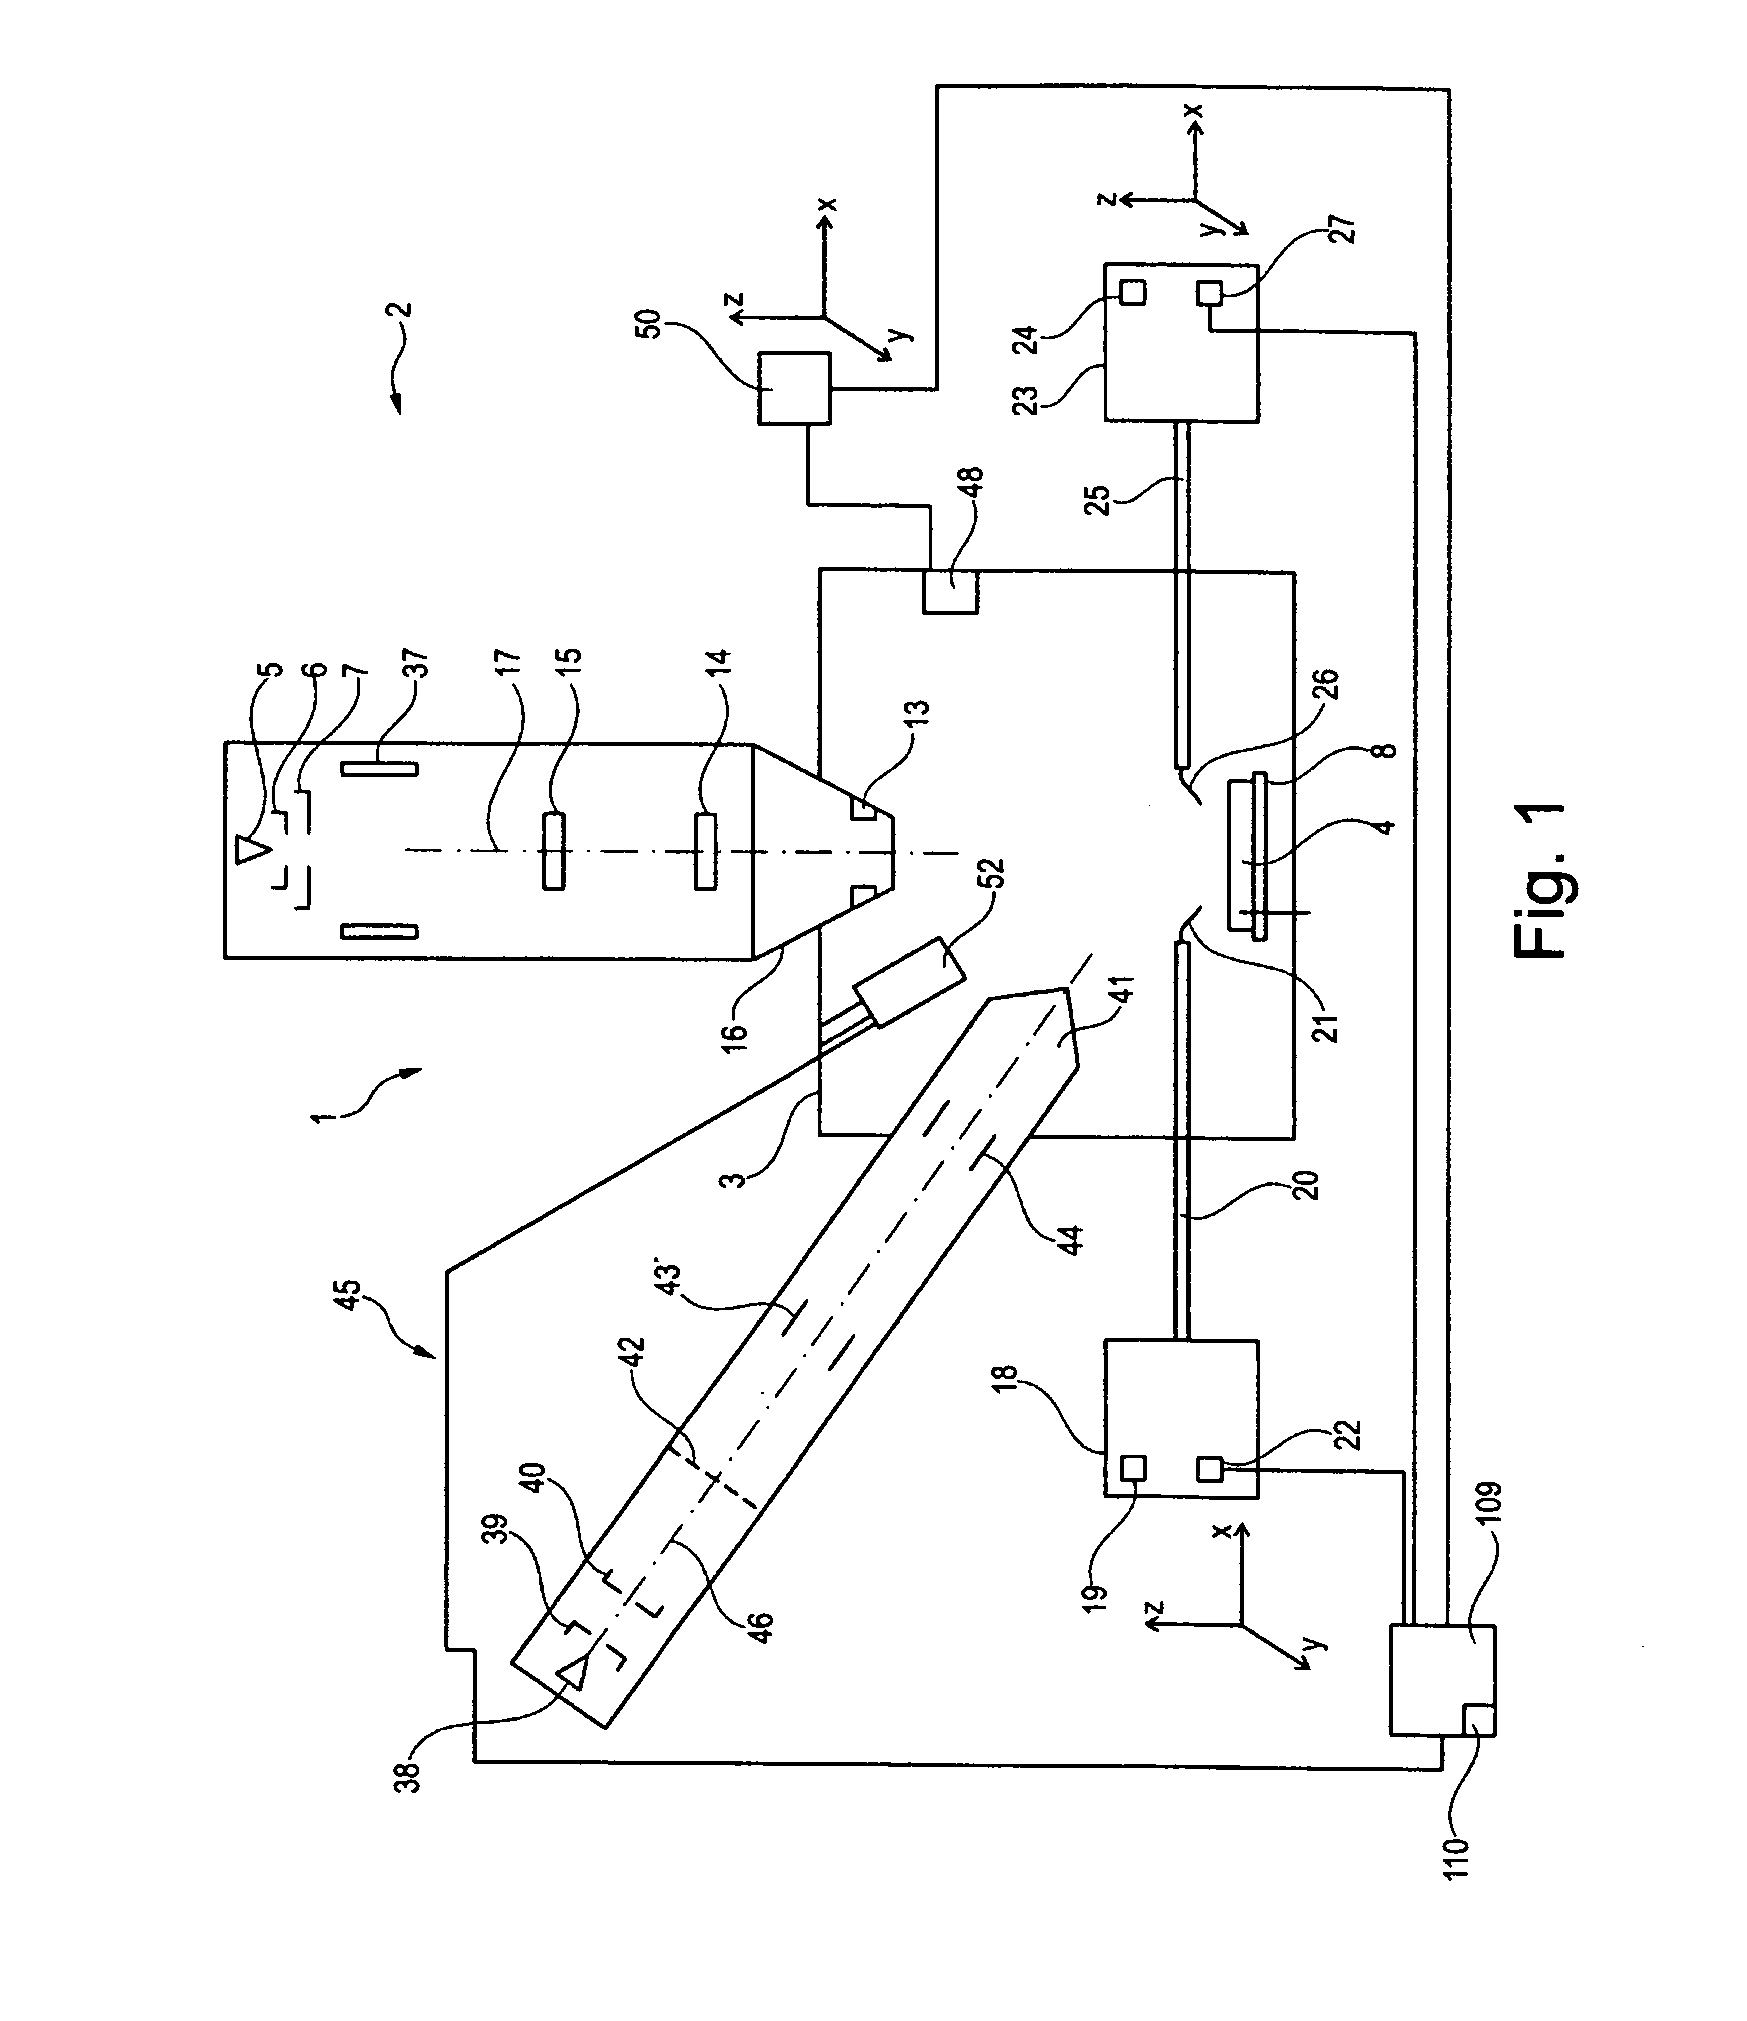 Method for measuring a distance of a component from an object and for setting a position of a component in a particle beam device